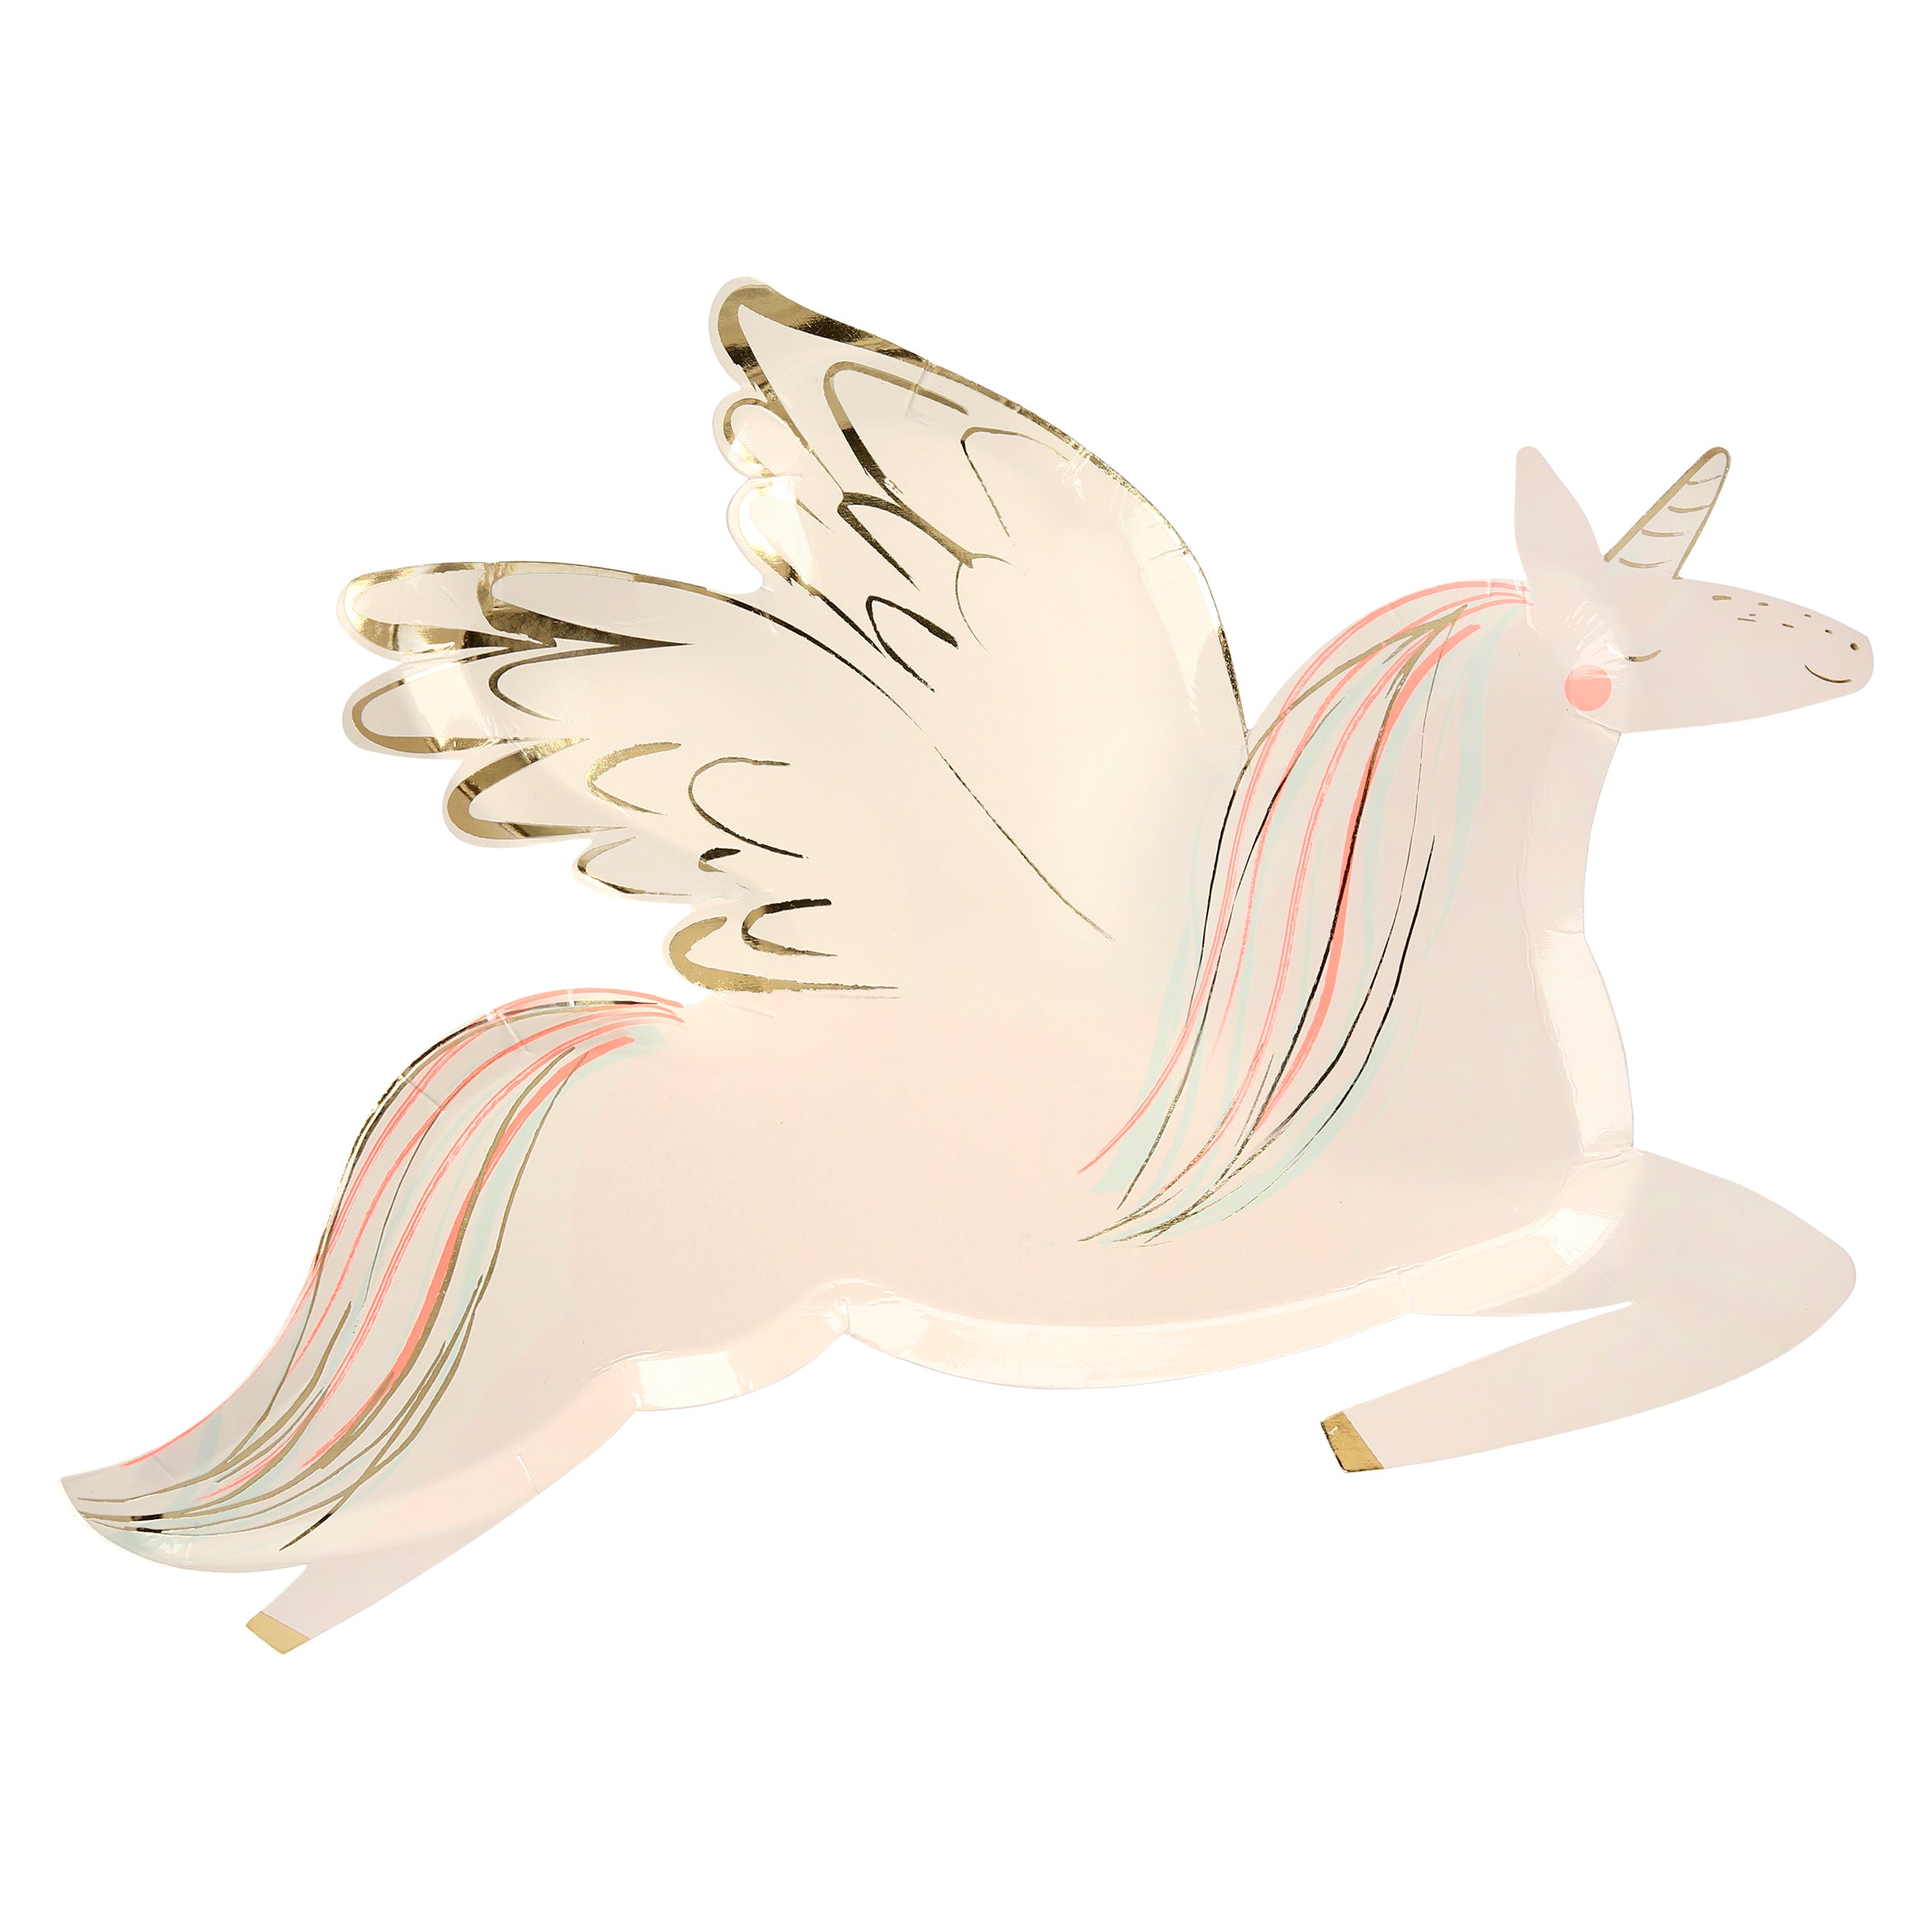 These delightful plates feature a winged unicorn with shimmering gold foil detail.